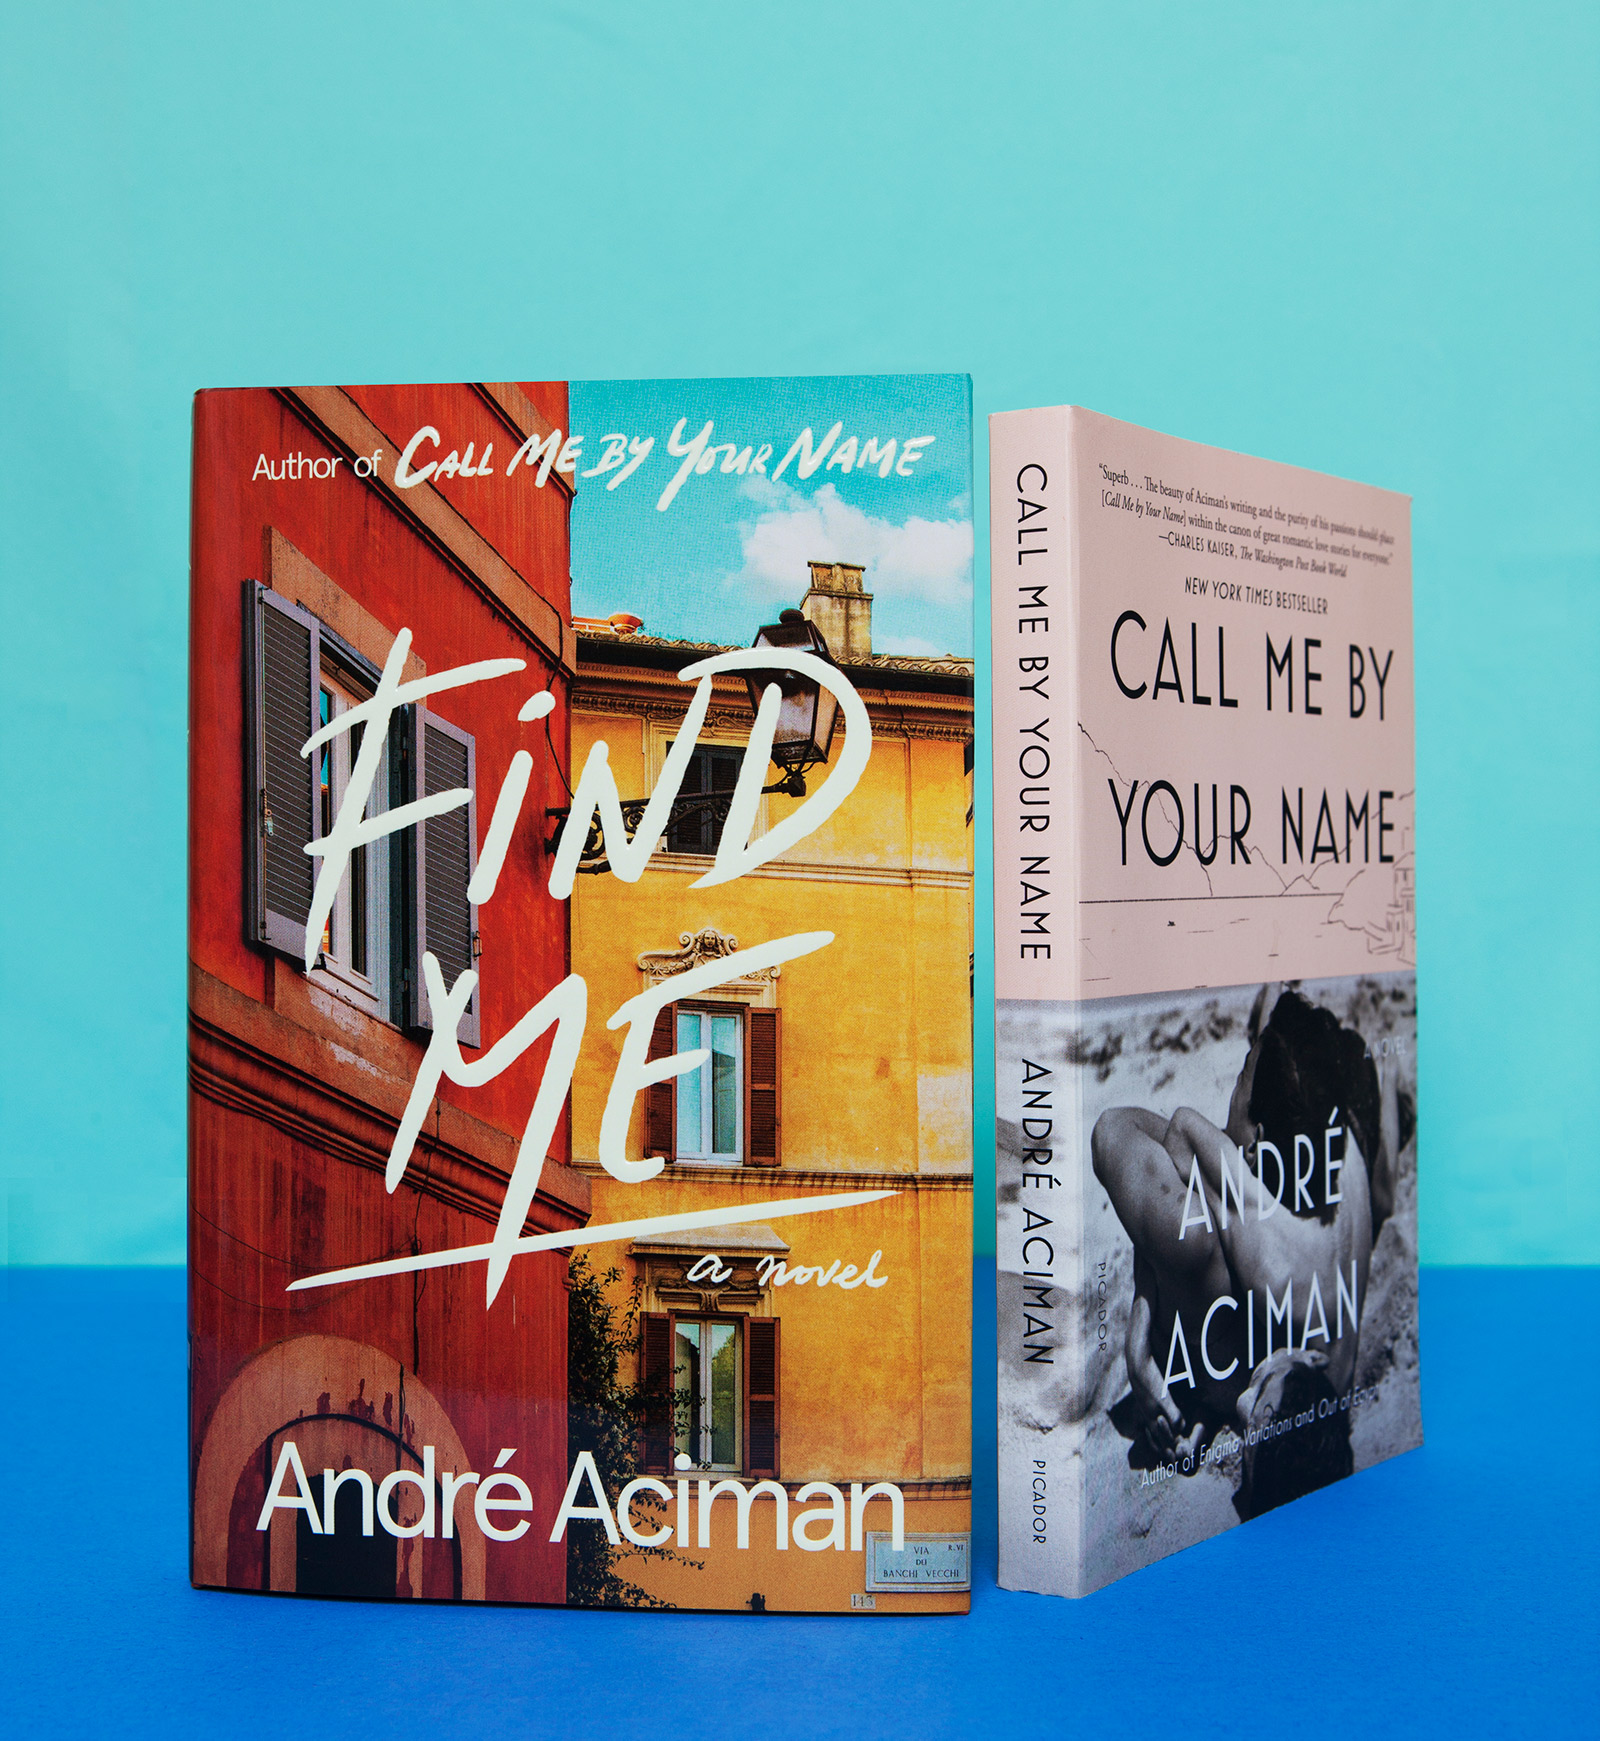 Aciman tried for years to write a sequel to 'Call Me by Your Name' but struggled to find a way in; a chance encounter led to a breakthrough